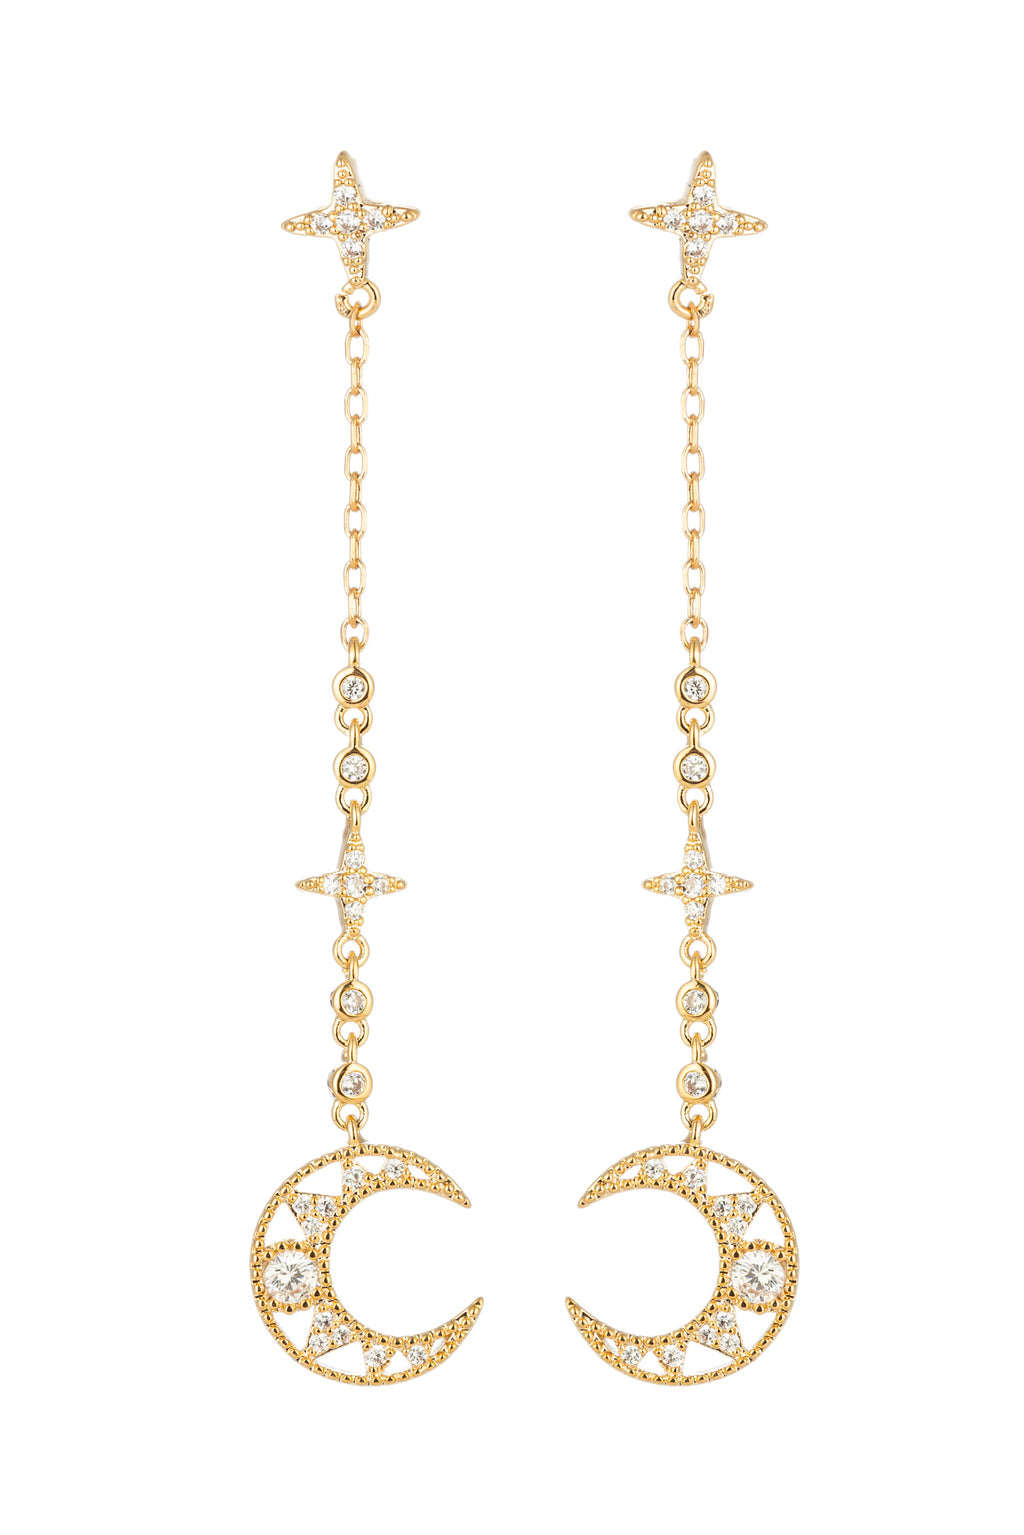 Gold crescent moon dangle earrings studded with CZ crystals.